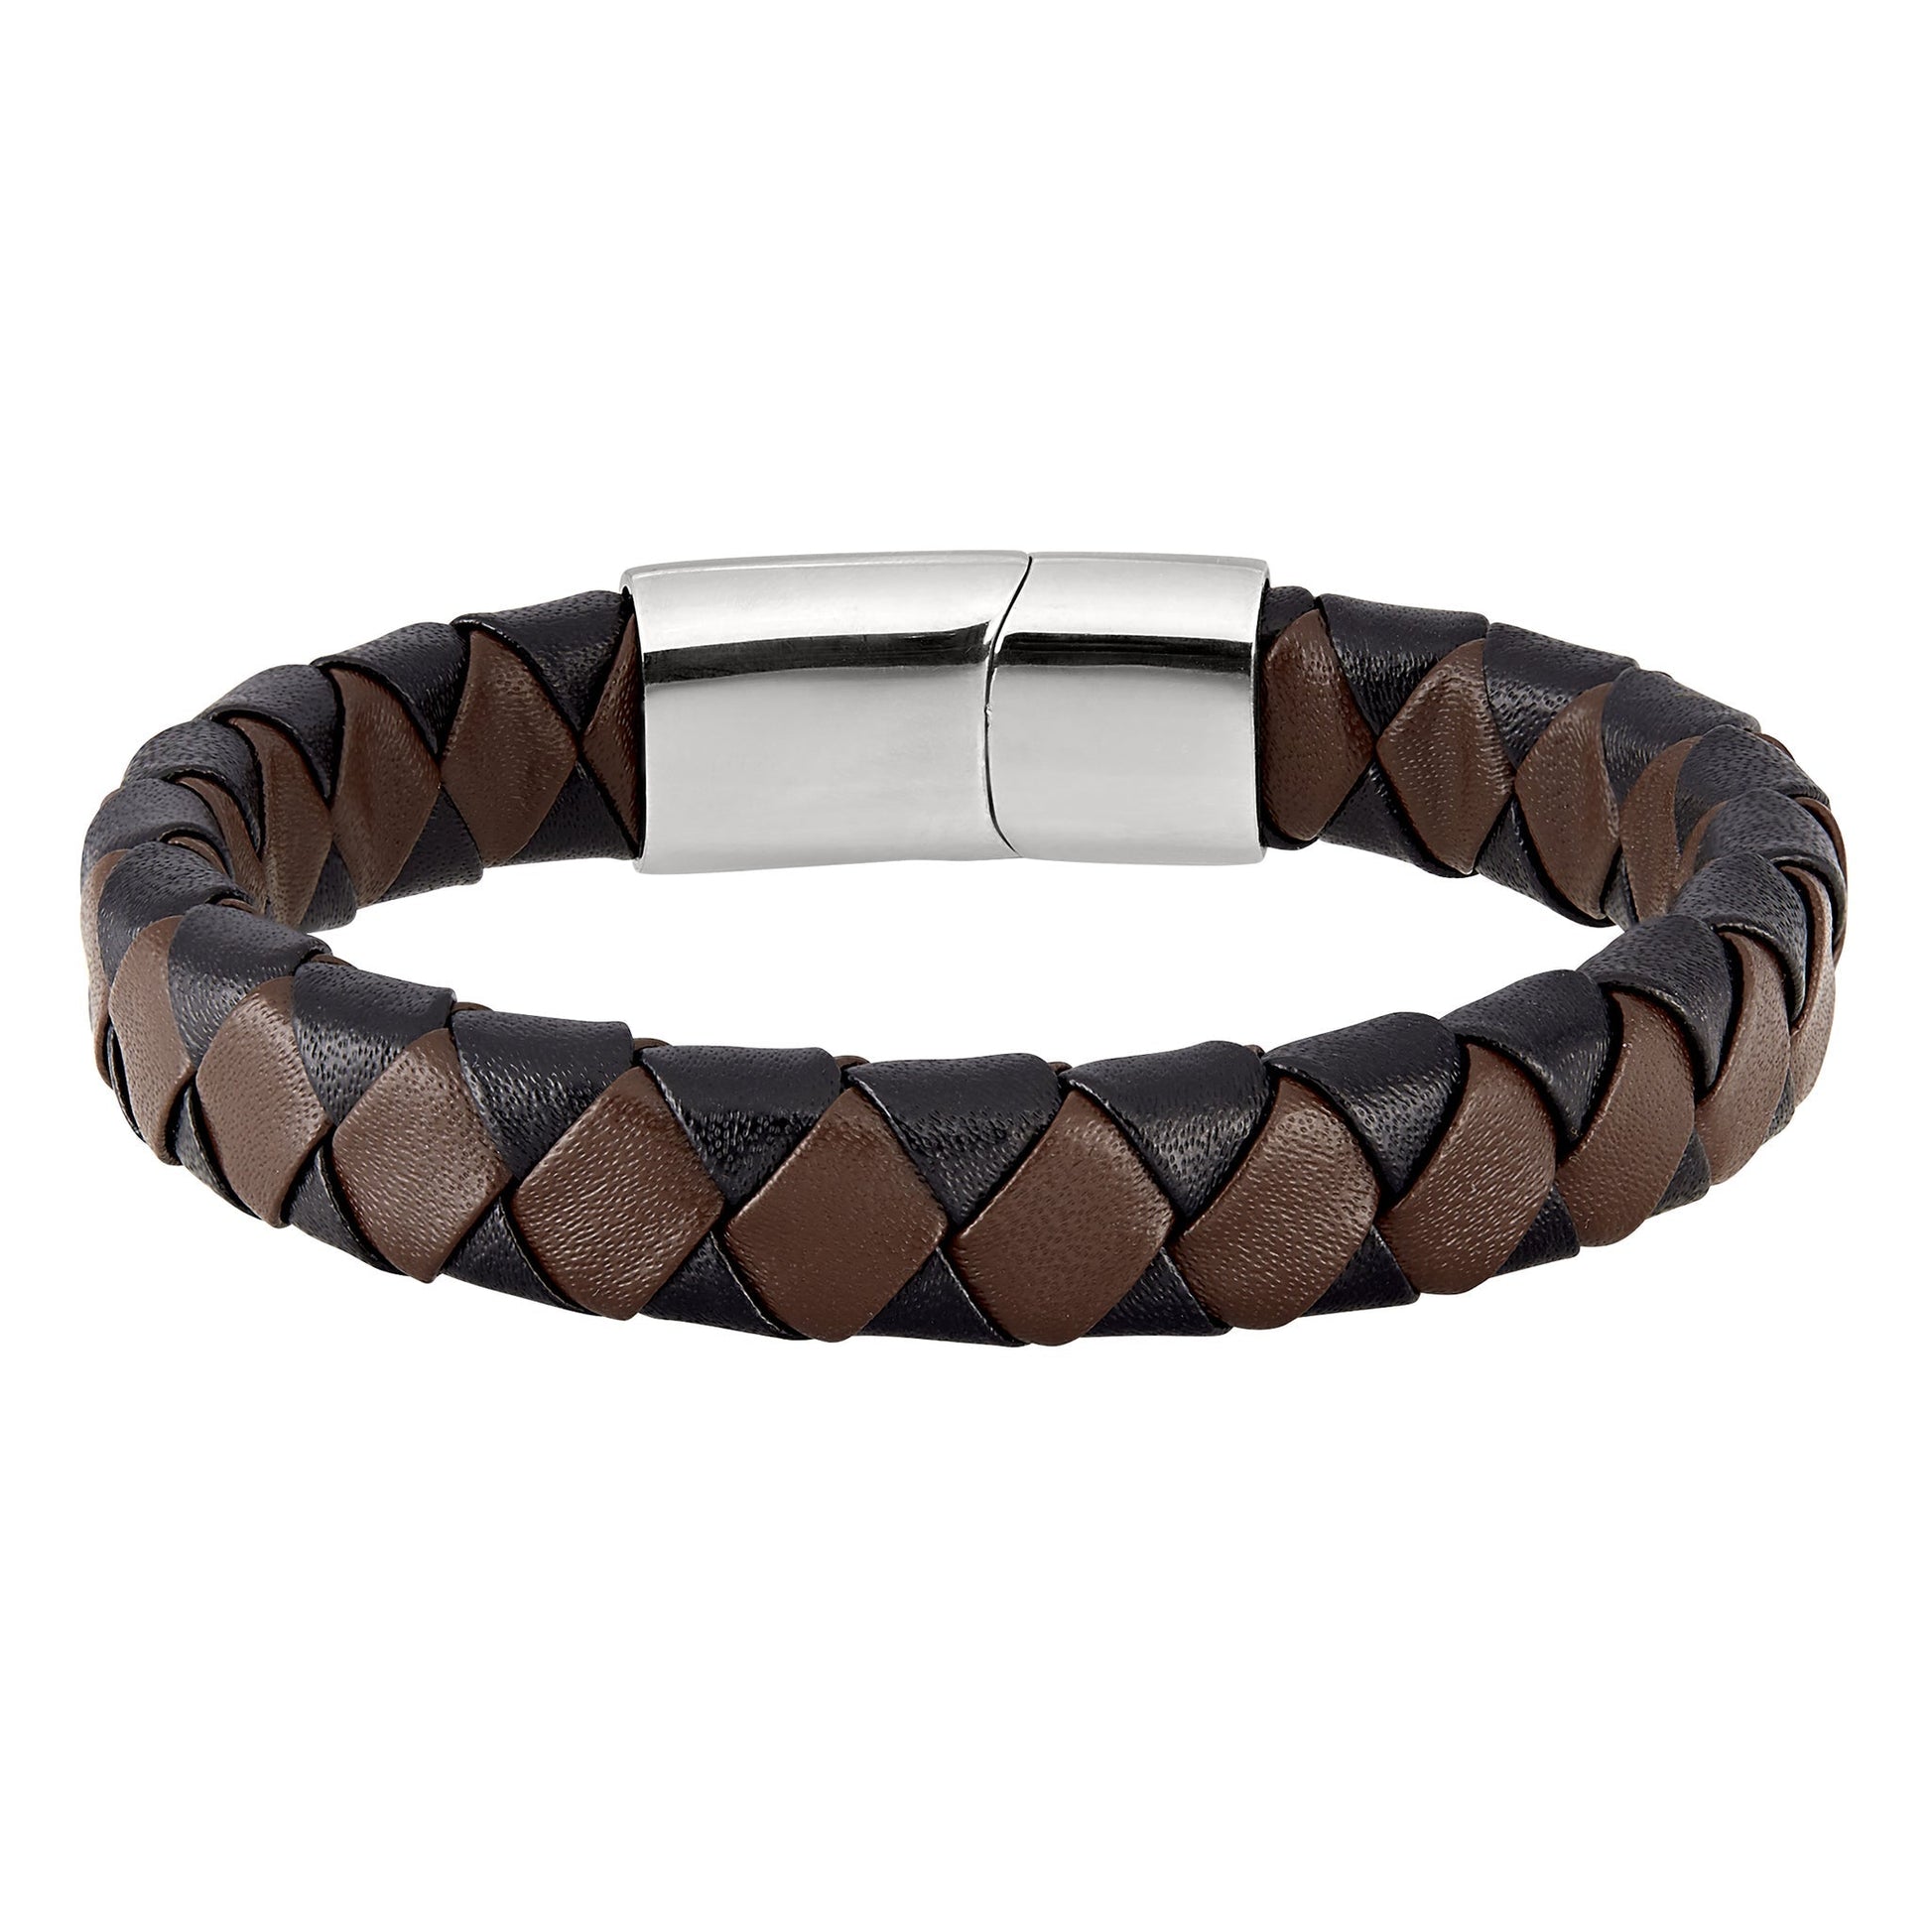 A black & brown braided leather stainless steel bracelet displayed on a neutral white background.